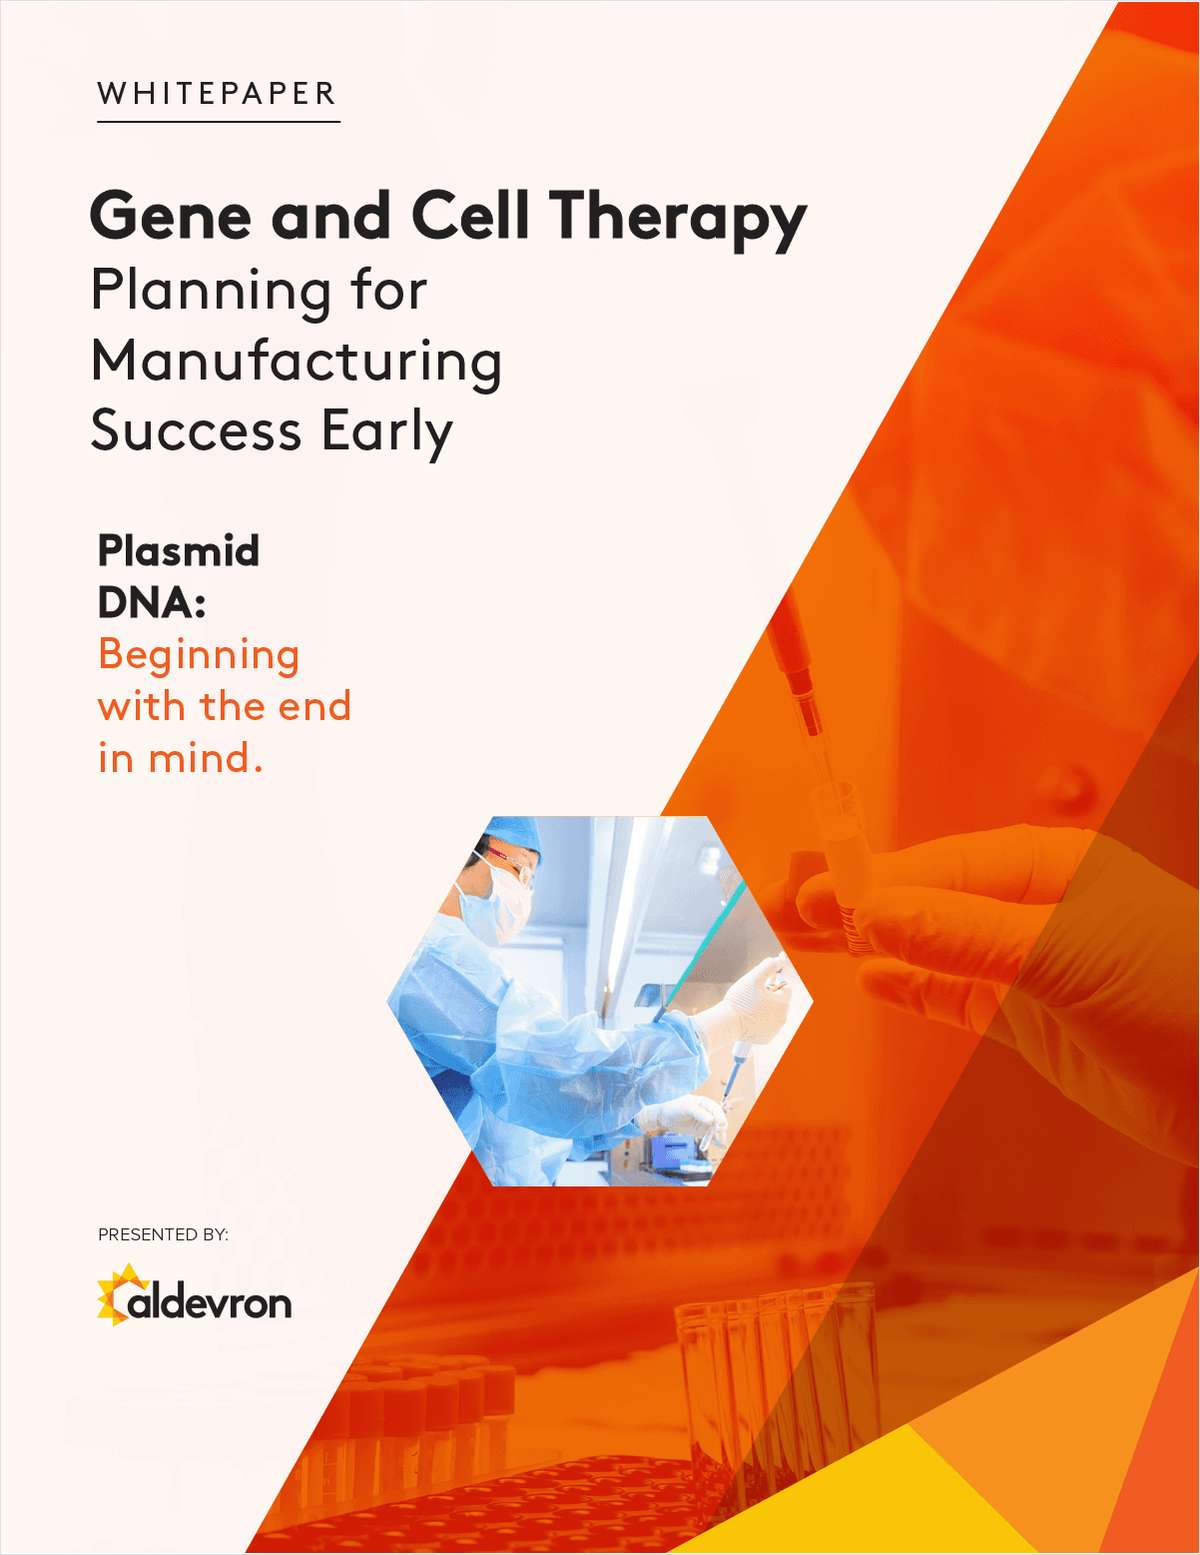 Plasmid DNA Design Considerations for Cell and Gene Therapy